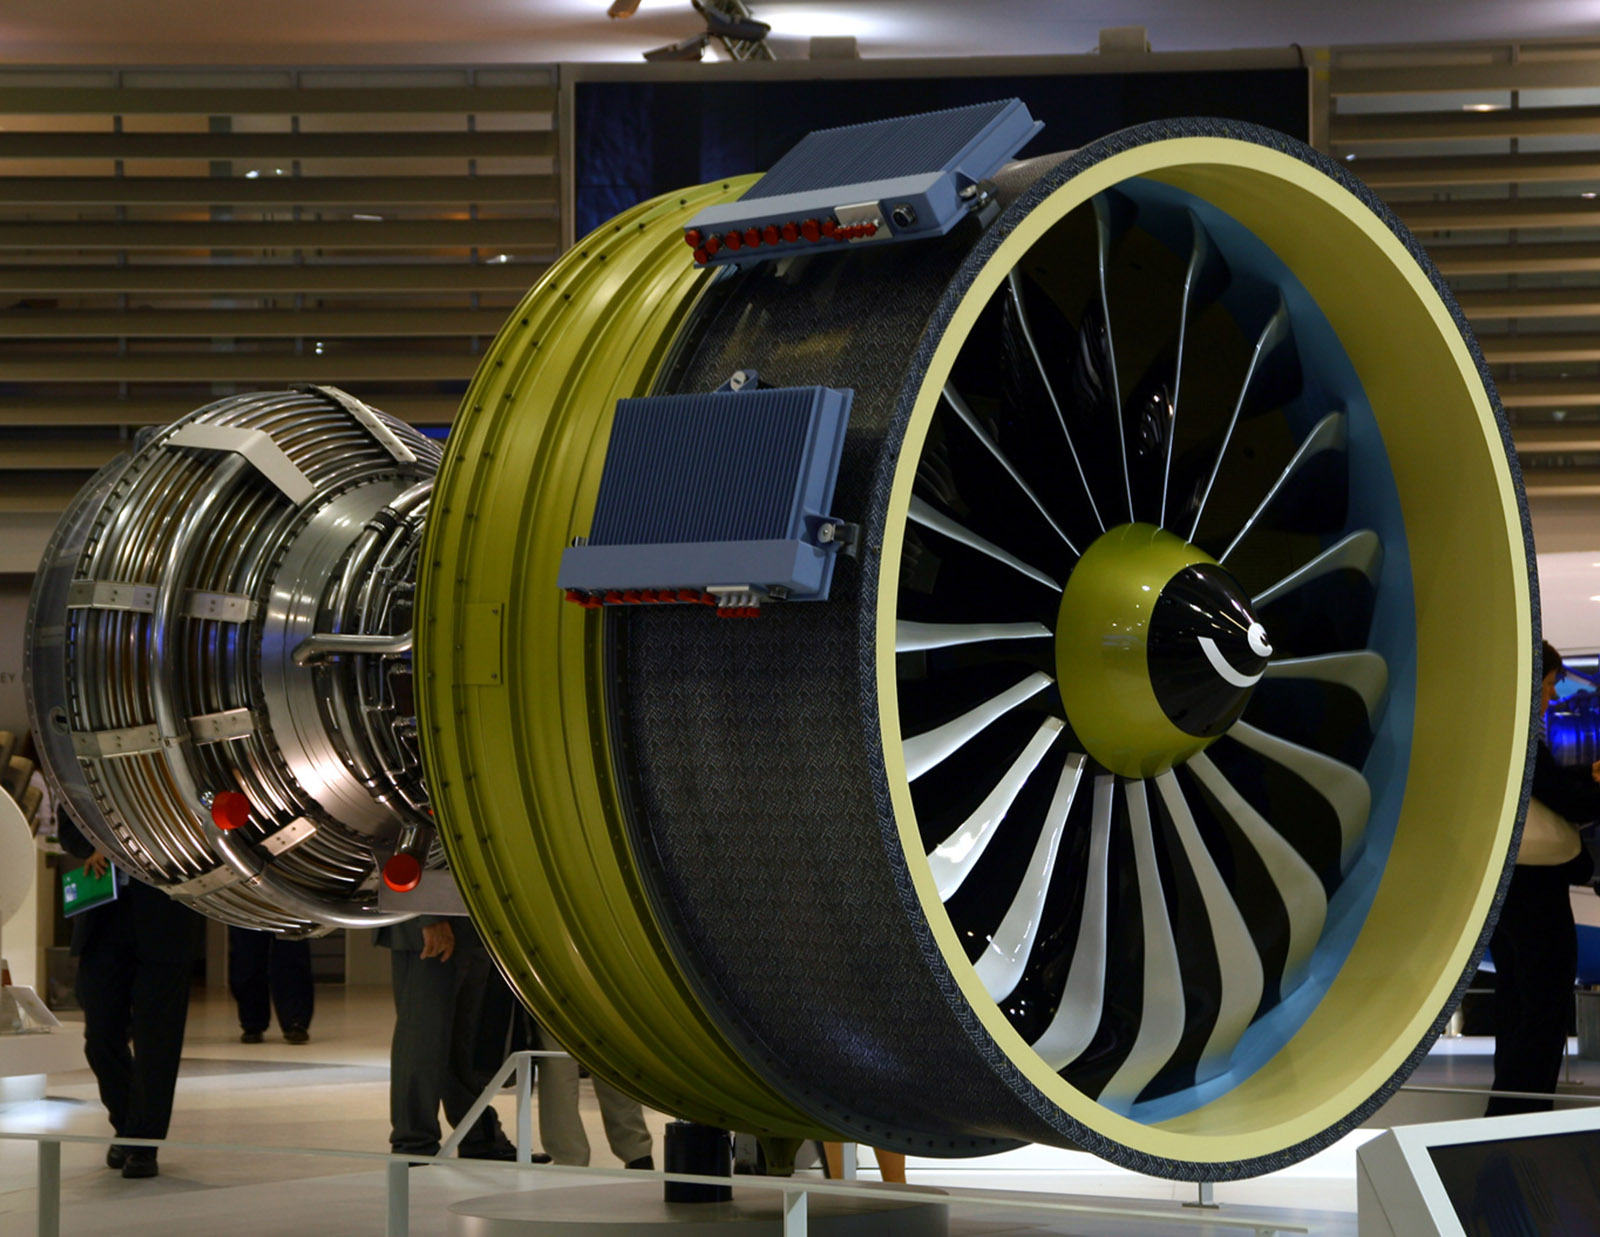 The CFM International LEAP ("Leading Edge Aviation Propulsion"[10]) is a high-bypass turbofan produced by CFM International, a 50-50 joint venture between American GE Aviation and French Safran Aircraft Engines (formerly Snecma), the successor of the successful CFM56 competing with the Pratt & Whitney PW1000G to power narrow-body aircraft. The engine has some of the first FAA-approved 3D-printed components.